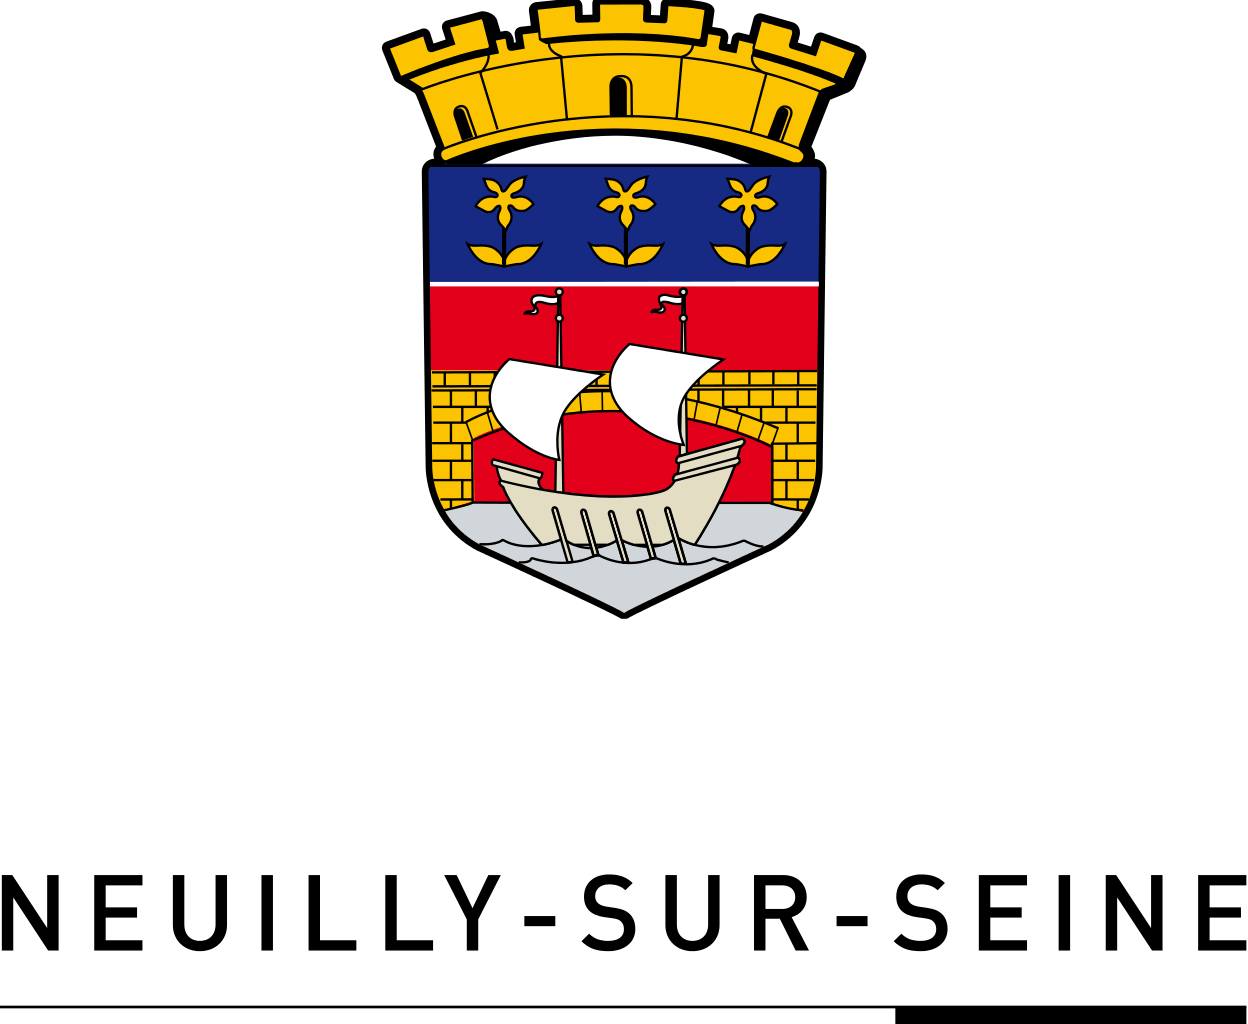 City of Neuilly sur Seine Administration